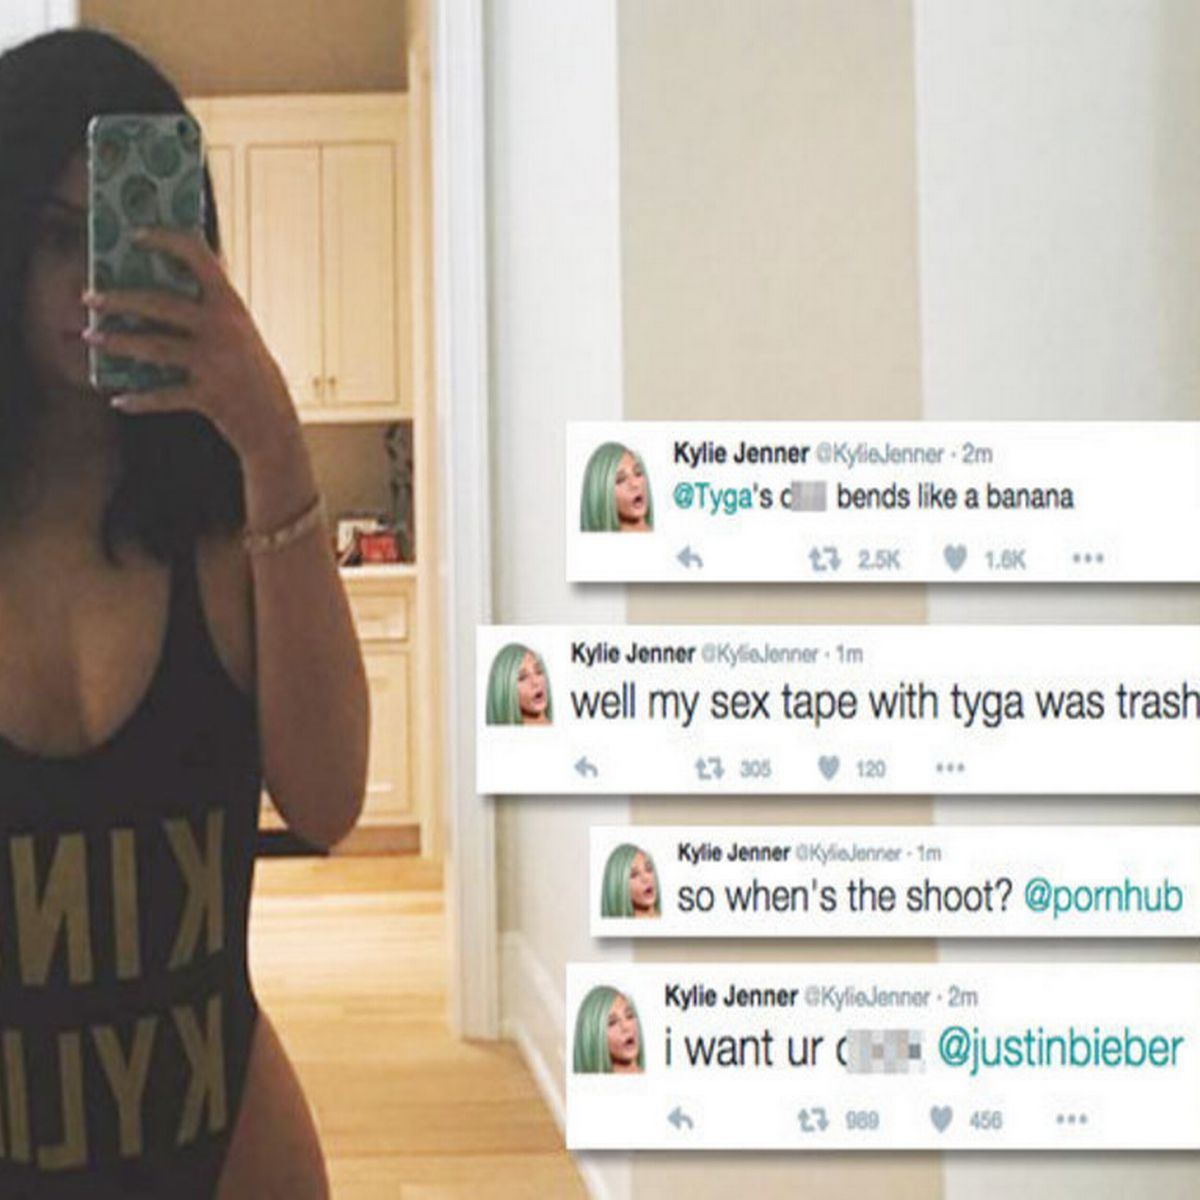 dennis balog recommends kylie jenner sec tape pic